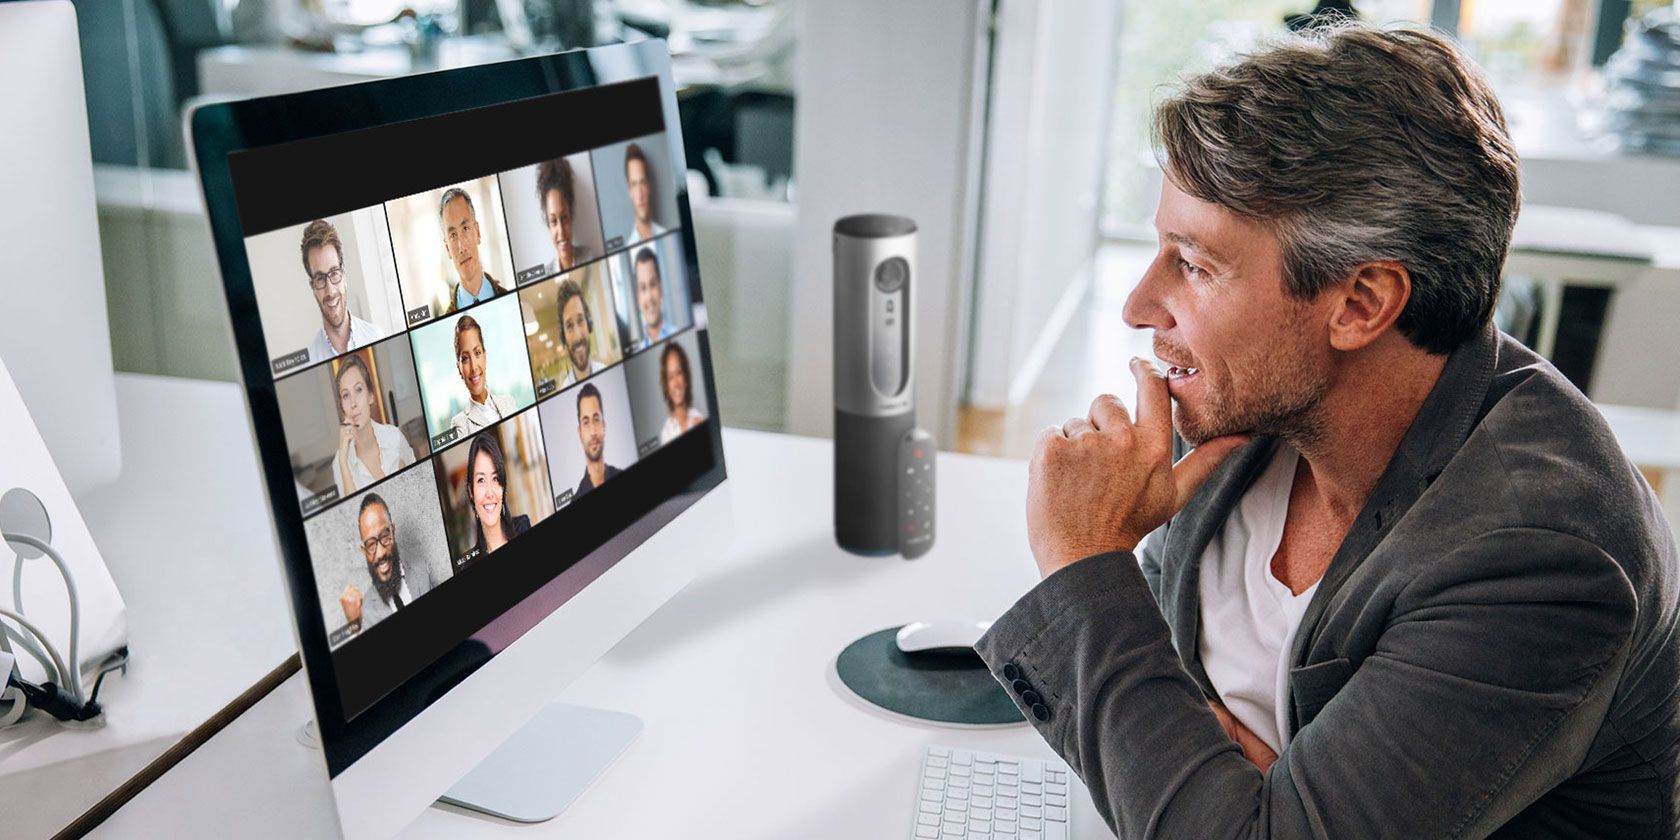 Use Zoom for Online Meetings